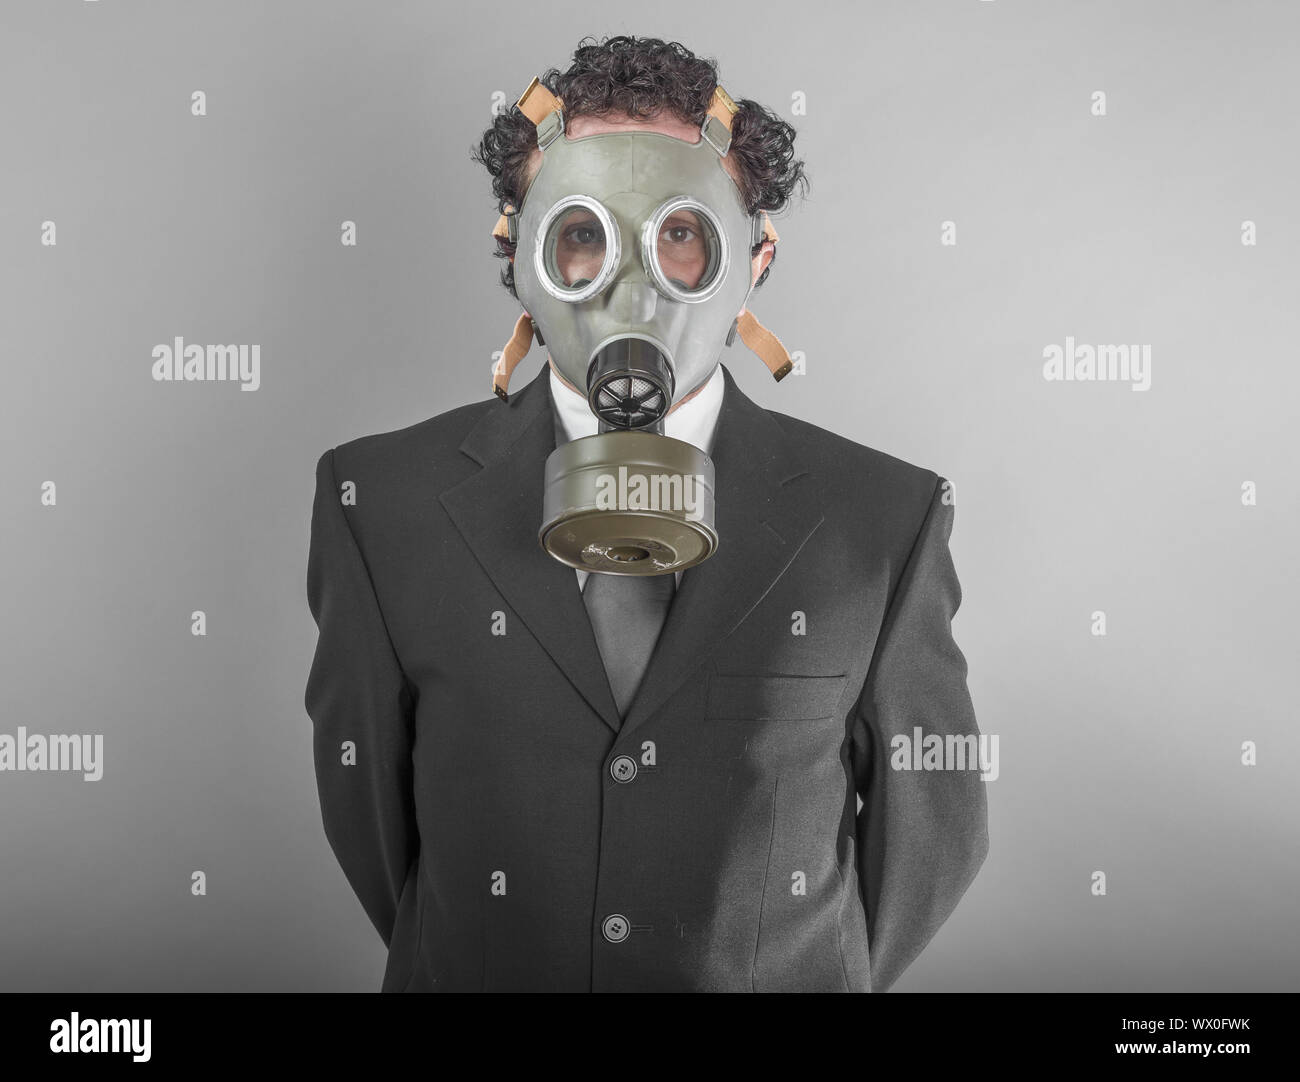 Businessman with mask, concept business dangerous for the environment or for society Stock Photo